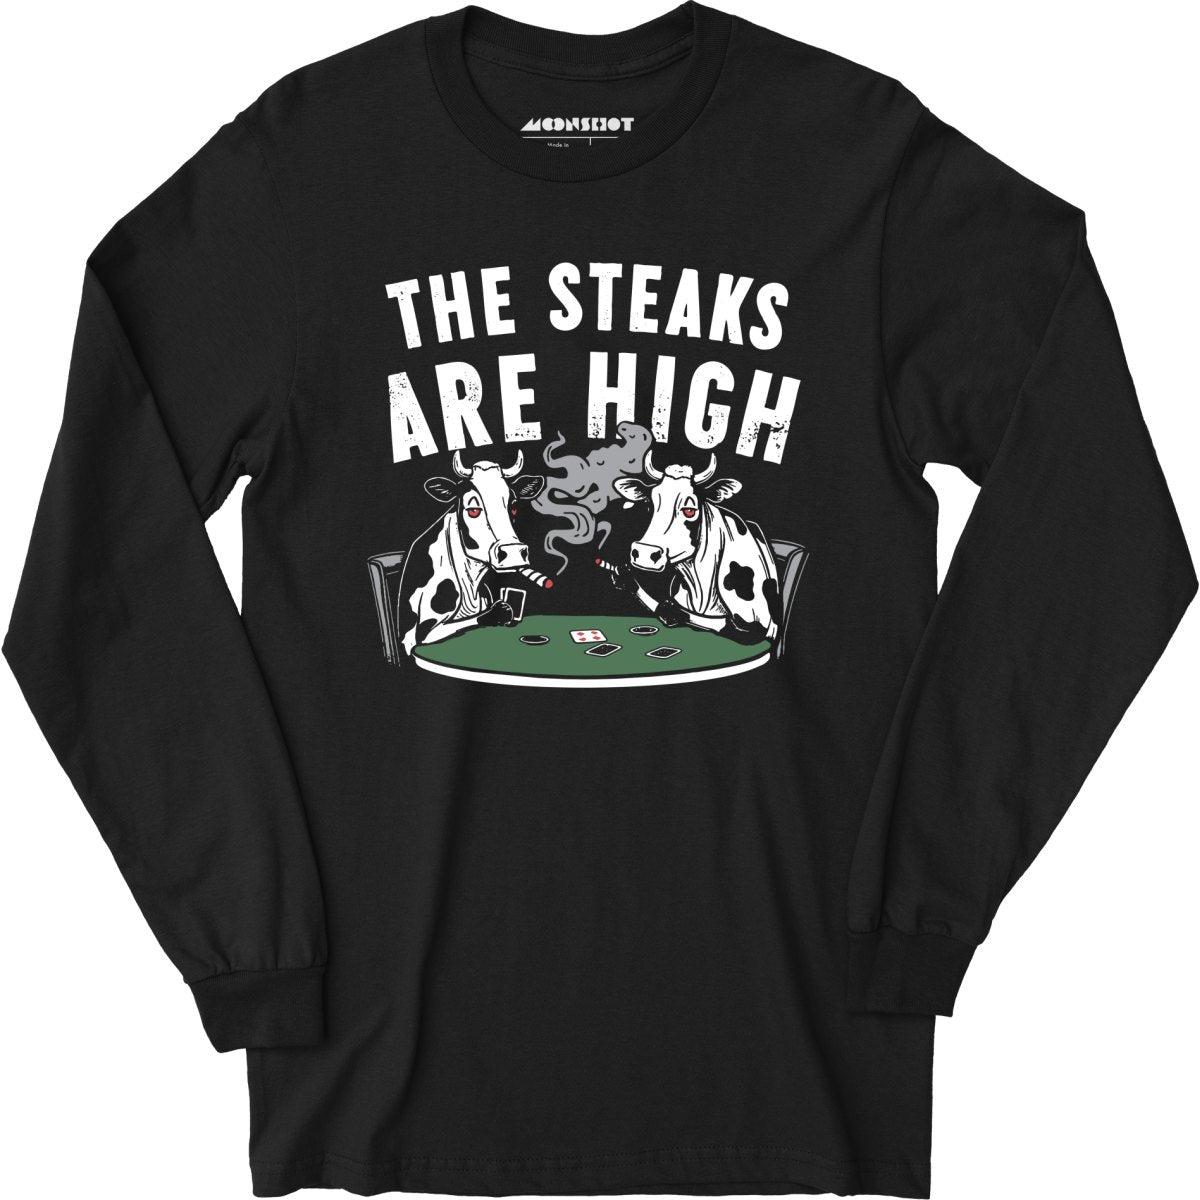 The Steaks Are High - Long Sleeve T-Shirt